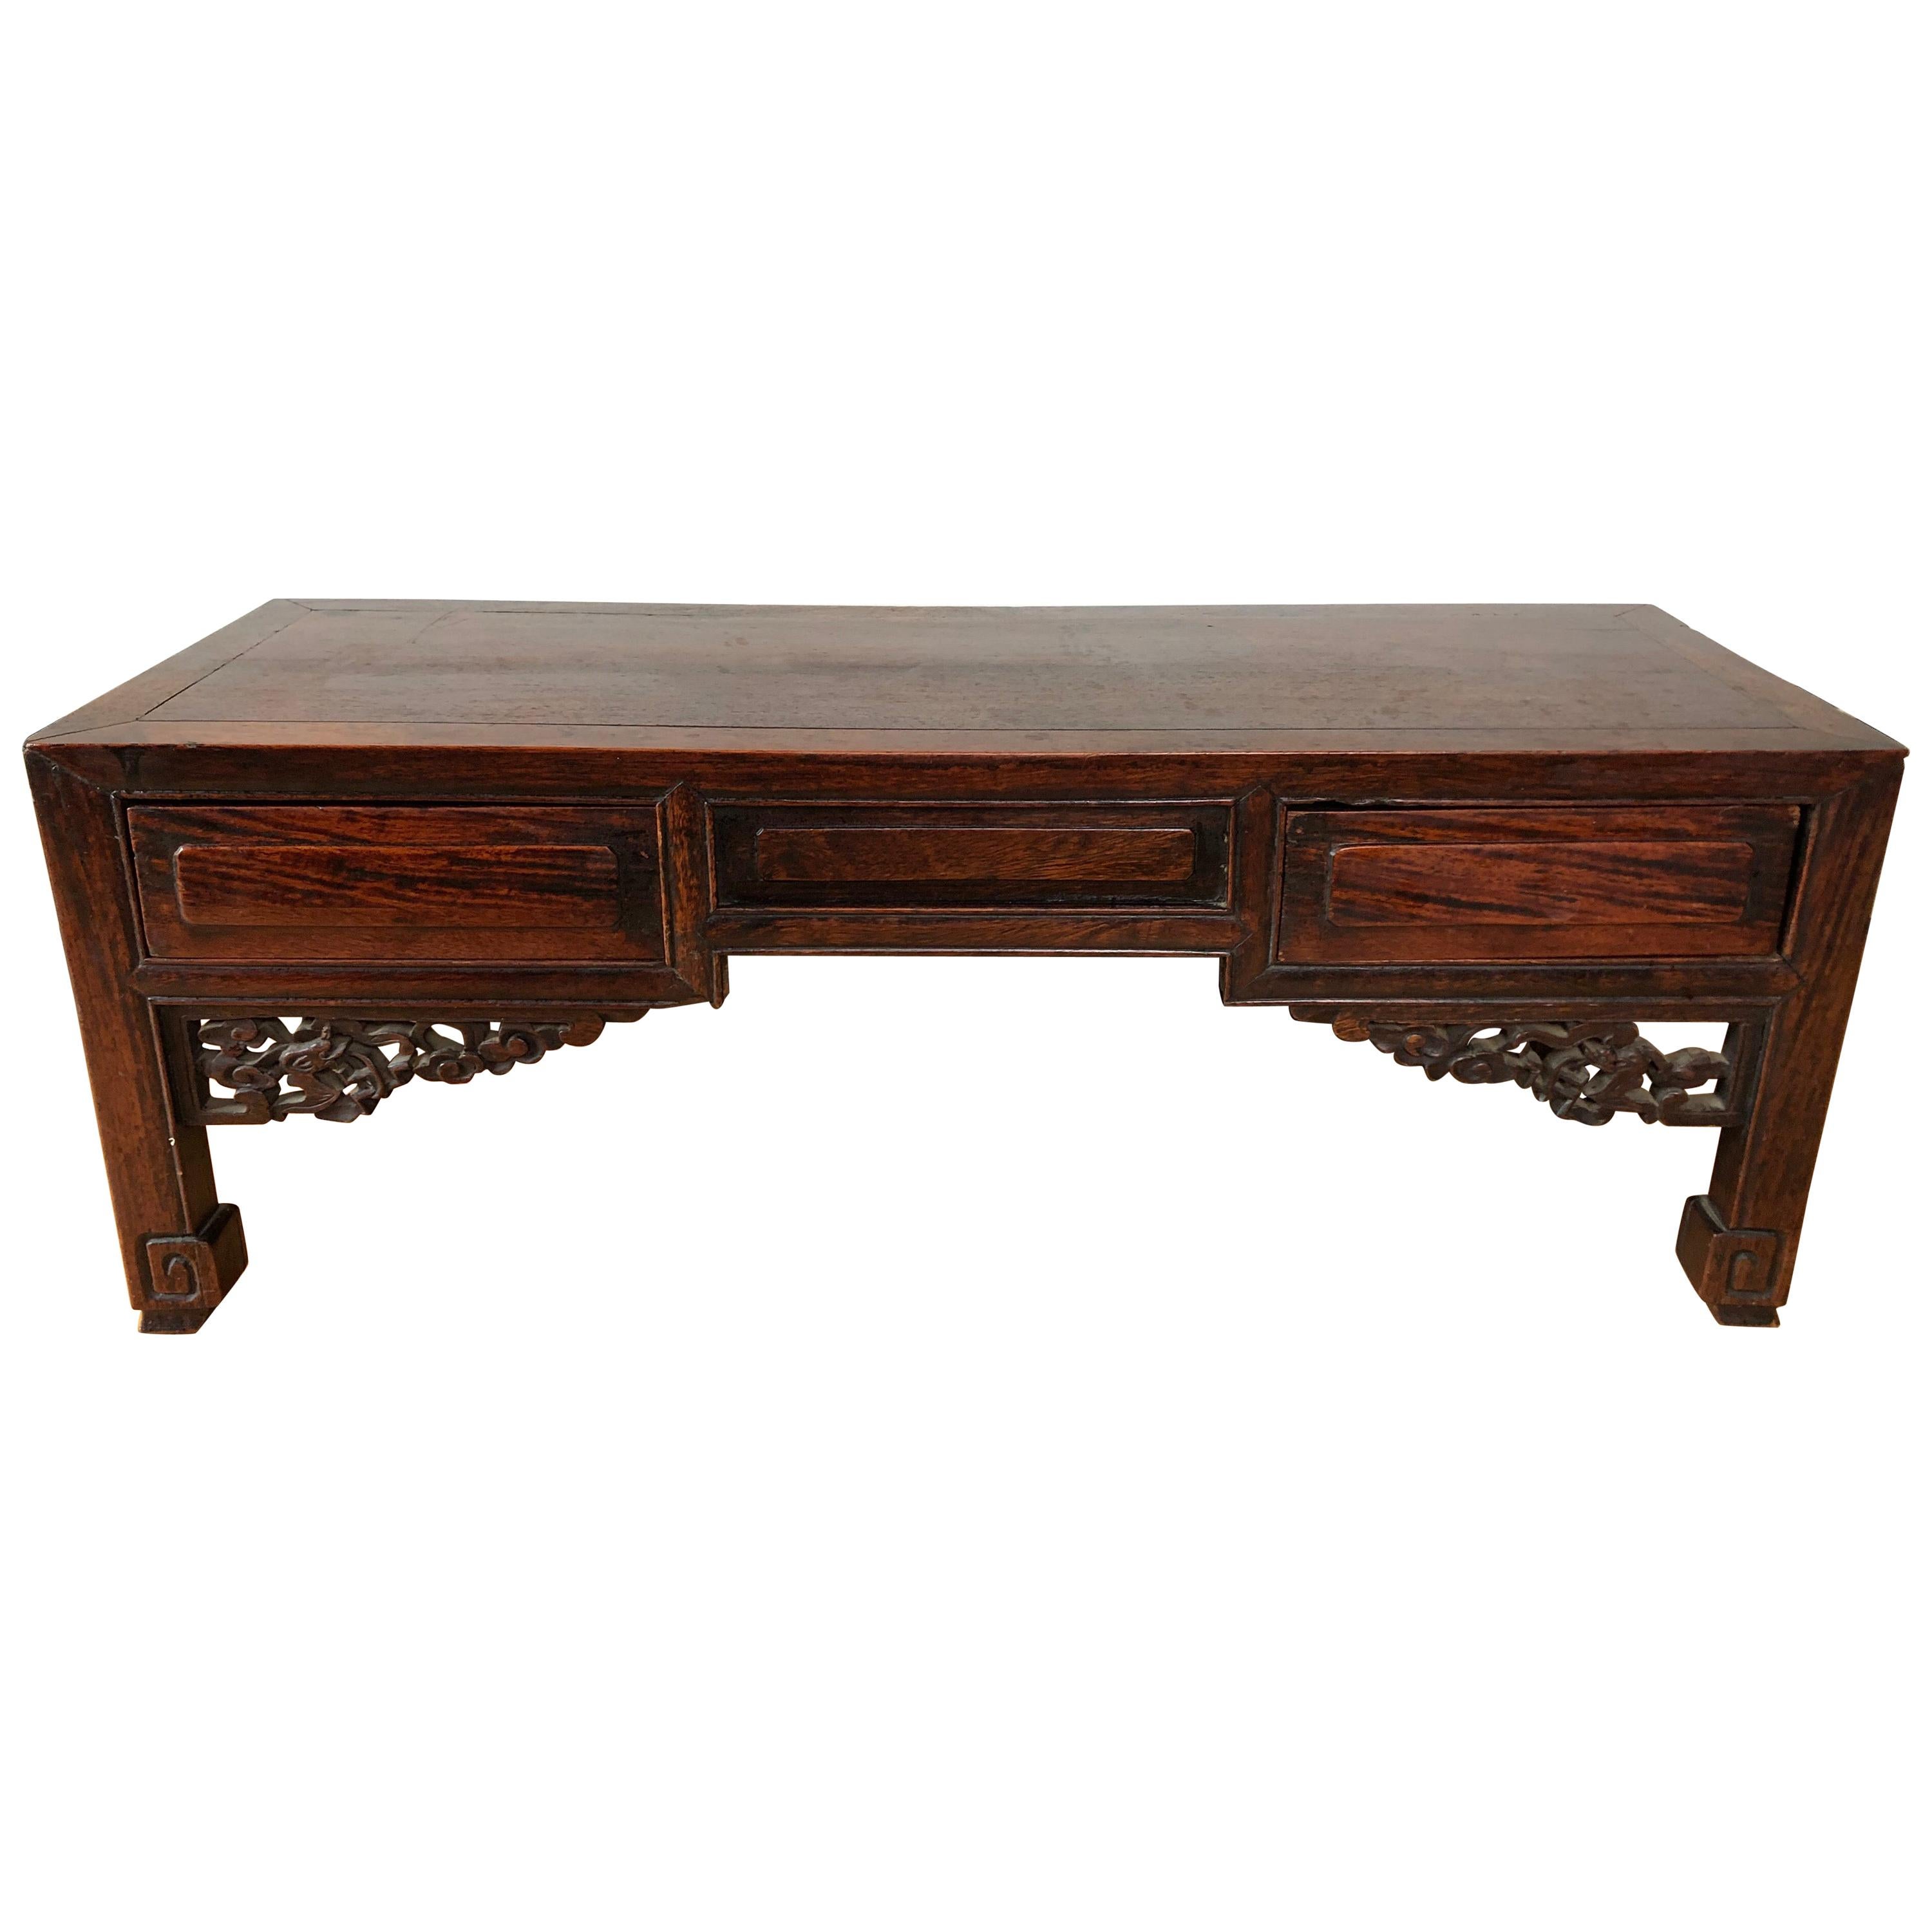 Early 20th Century Chinese Low Table